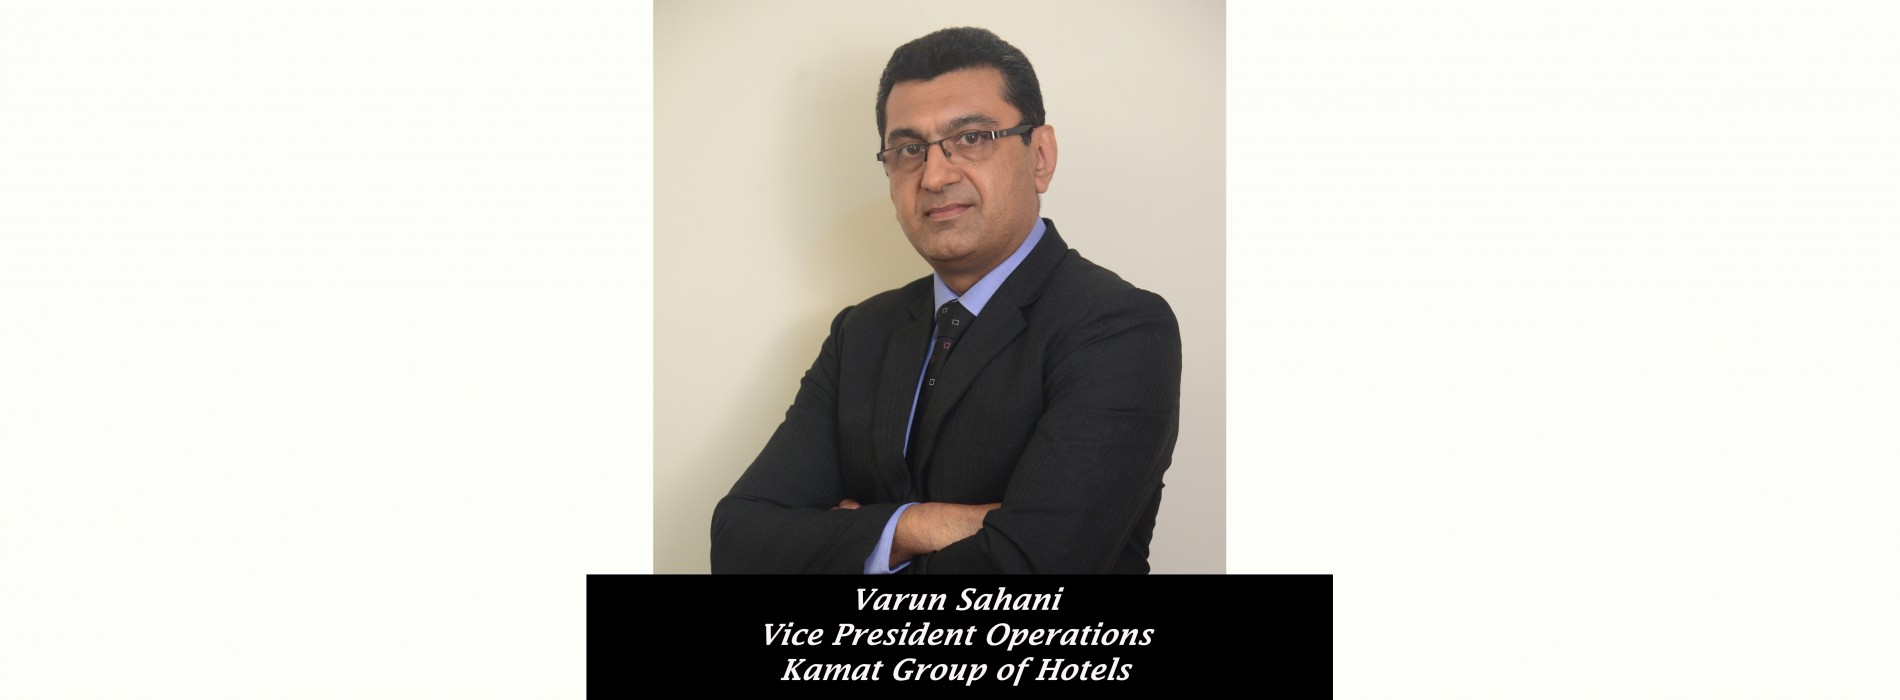 Kamat Group of Hotels appoints Varun Sahani as Vice President Operations